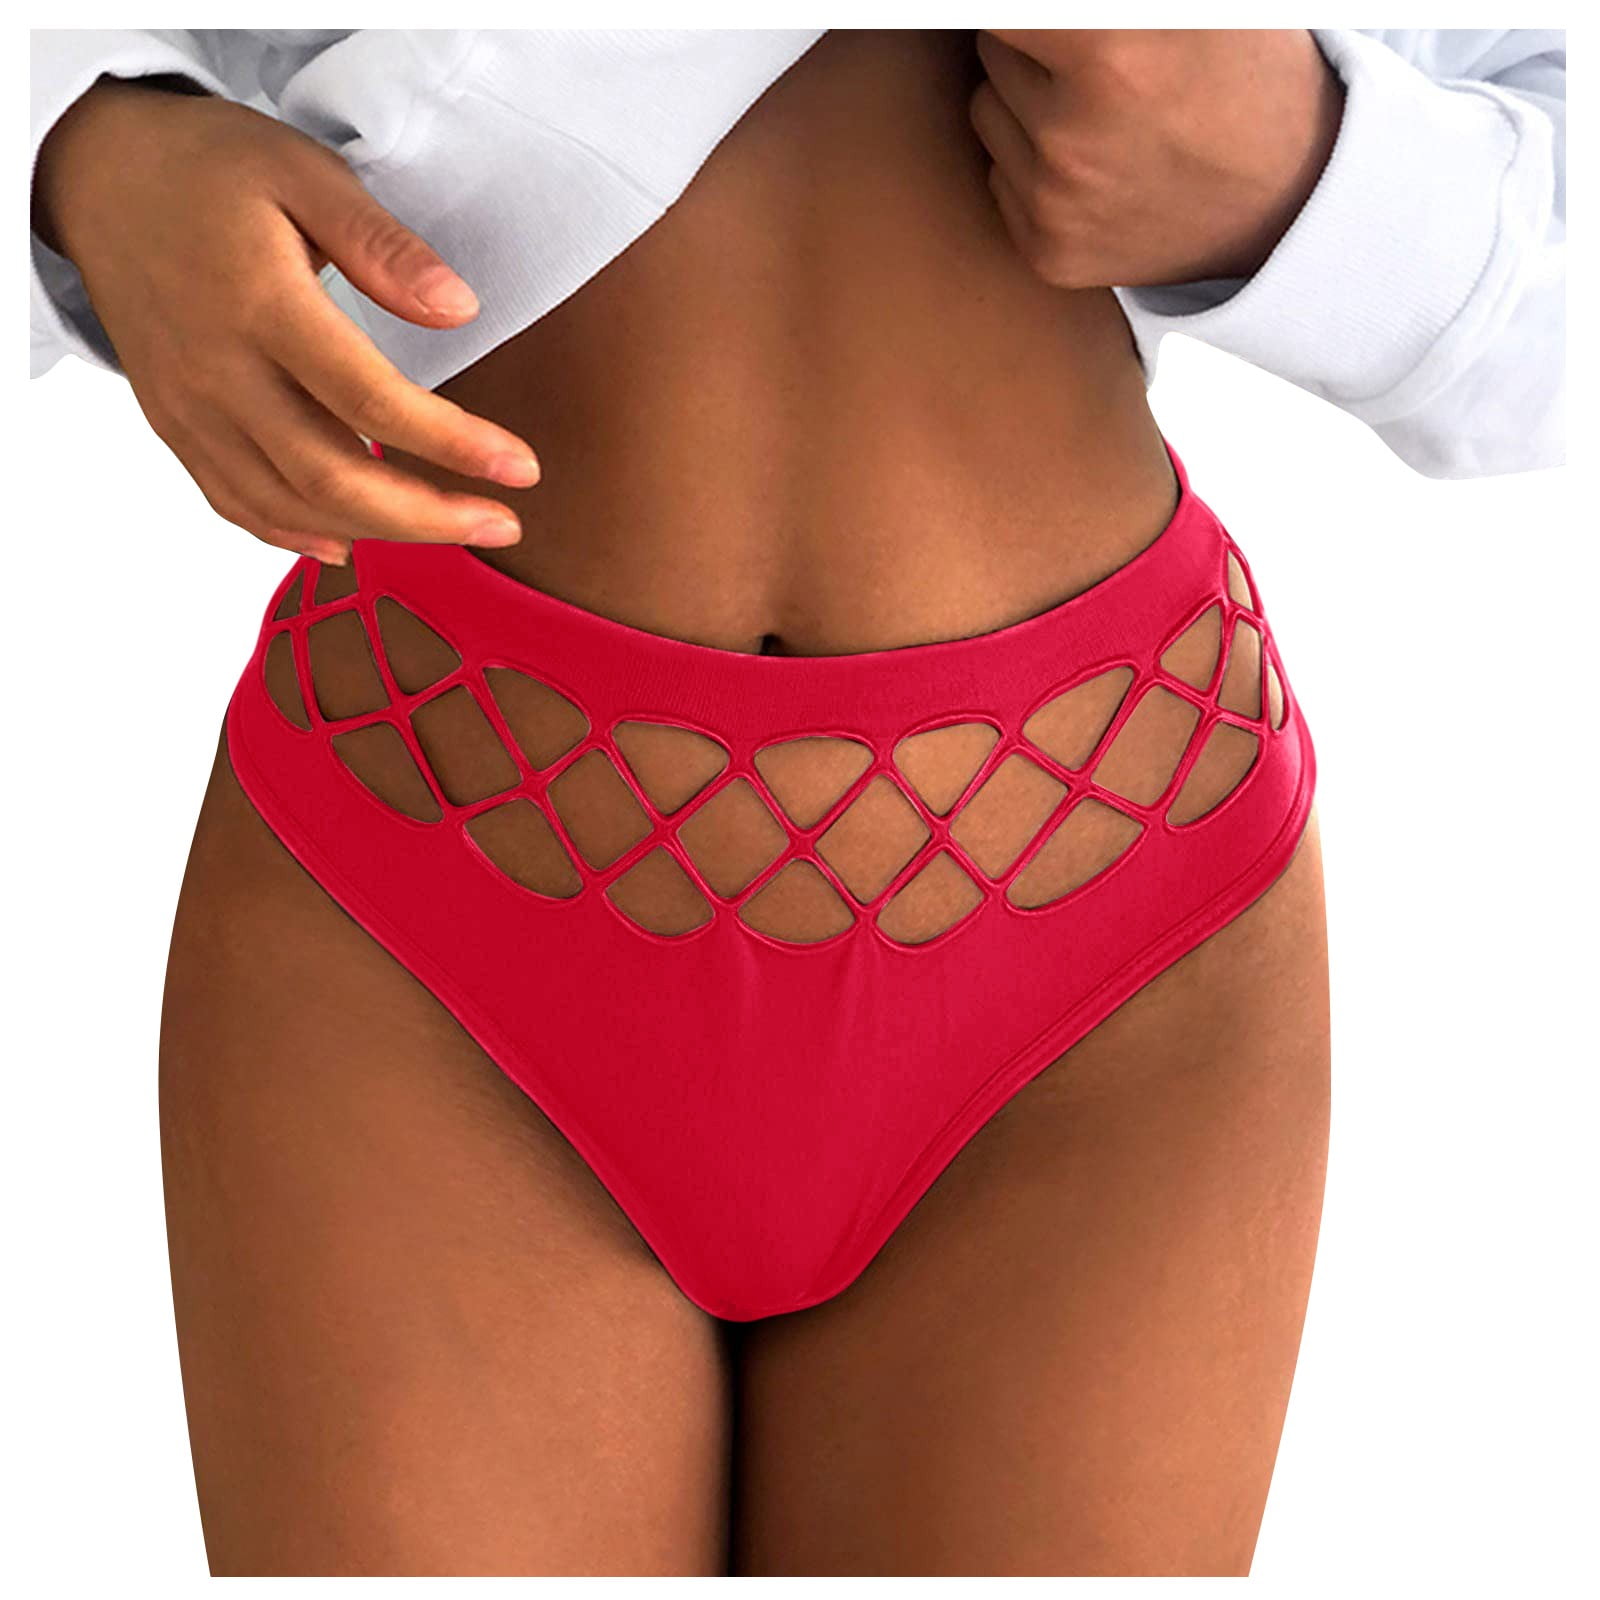 Qcmgmg Women's Briefs Low Rise Hollow Out Seamless Womens Panties Plus Size  Red M 